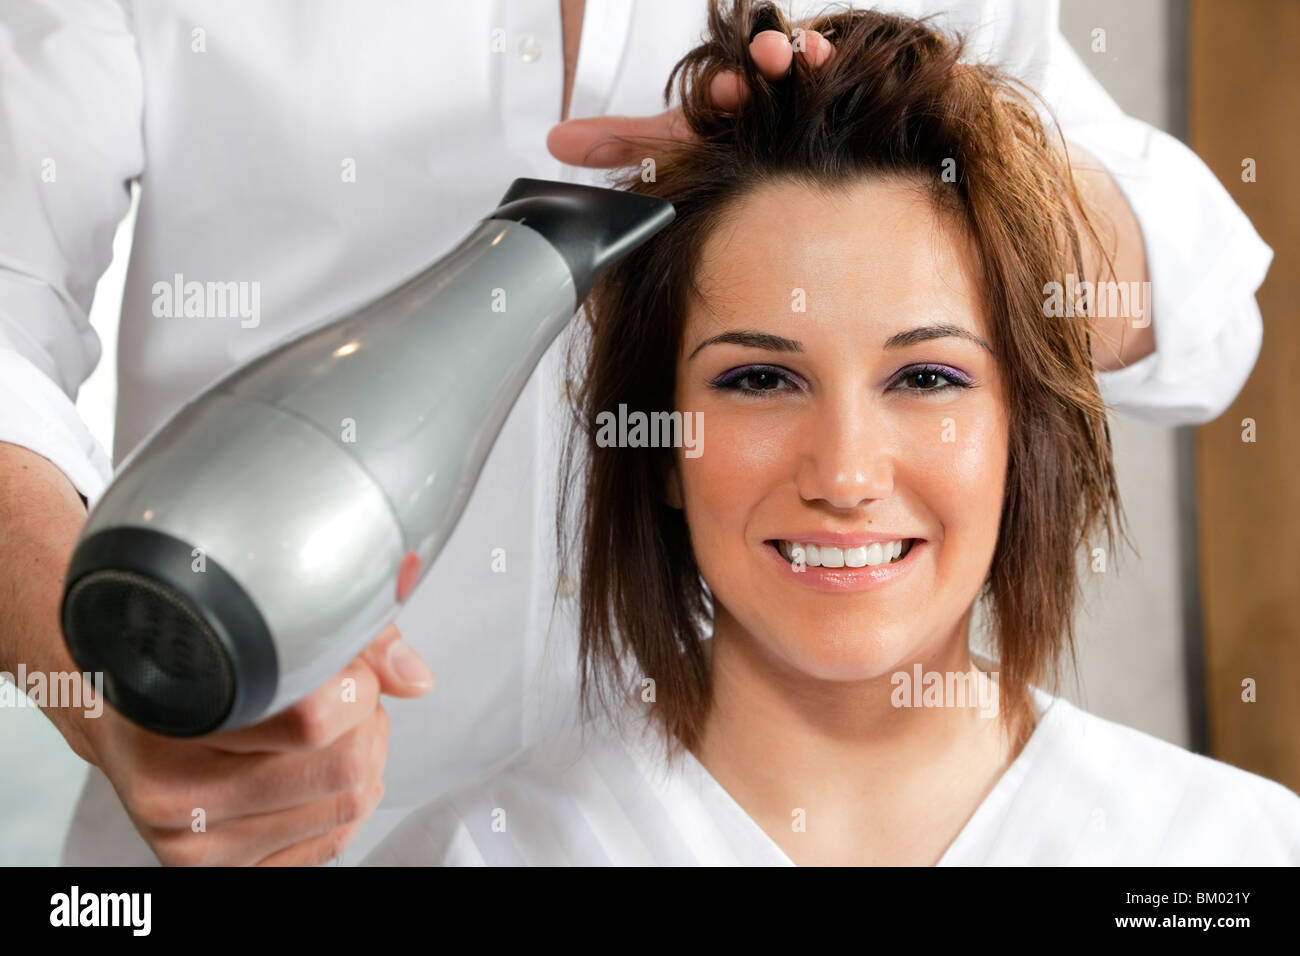 cropped view of hairstylist drying woman hair. Front view Stock Photo